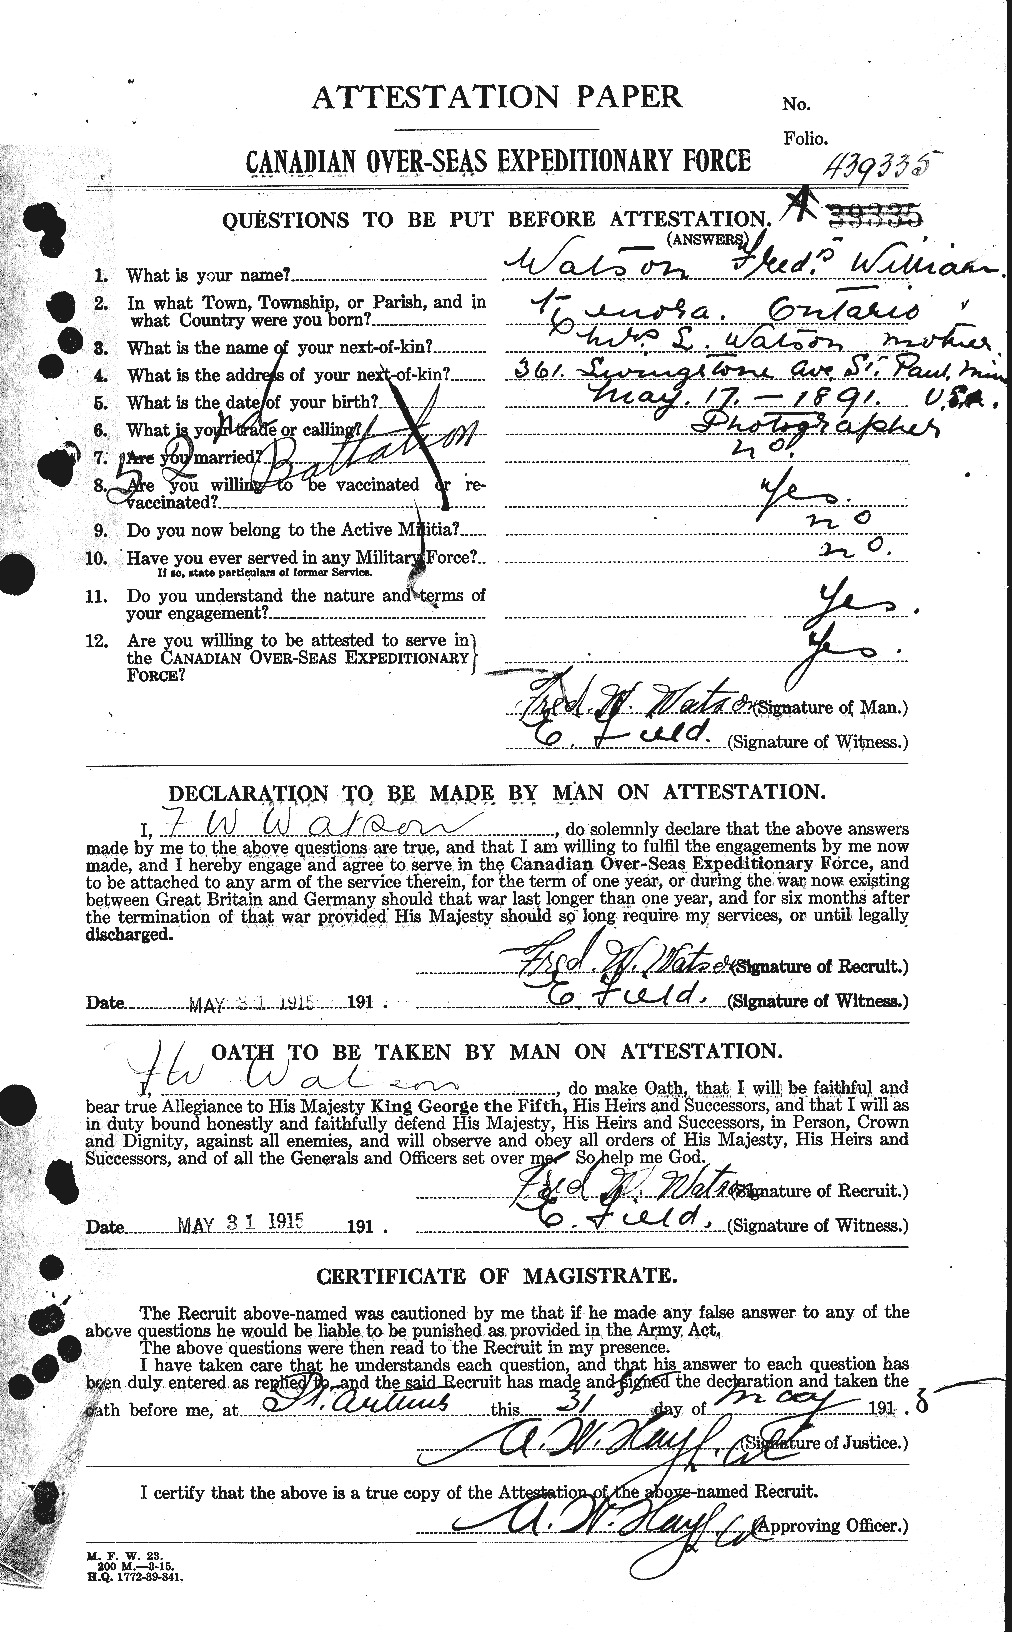 Personnel Records of the First World War - CEF 656745a